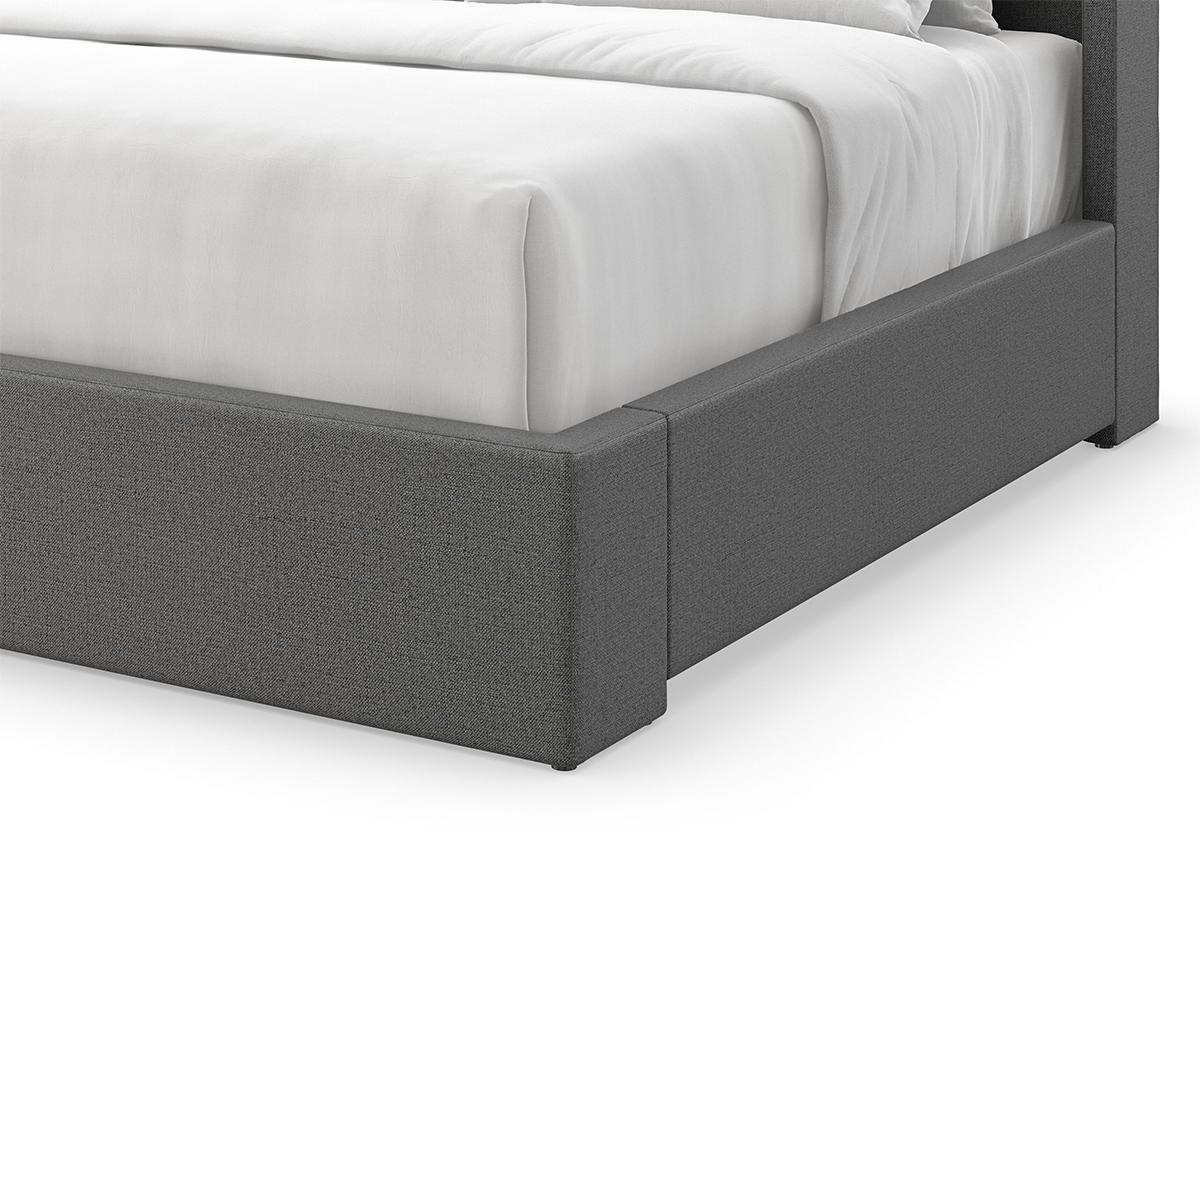 An elegant US king-sized upholstered bed frame featuring a high headboard that is flared out and curves gently at the sides. The frame is wrapped in a dark grey fabric with a subtle textured finish, which suggests a contemporary design that could